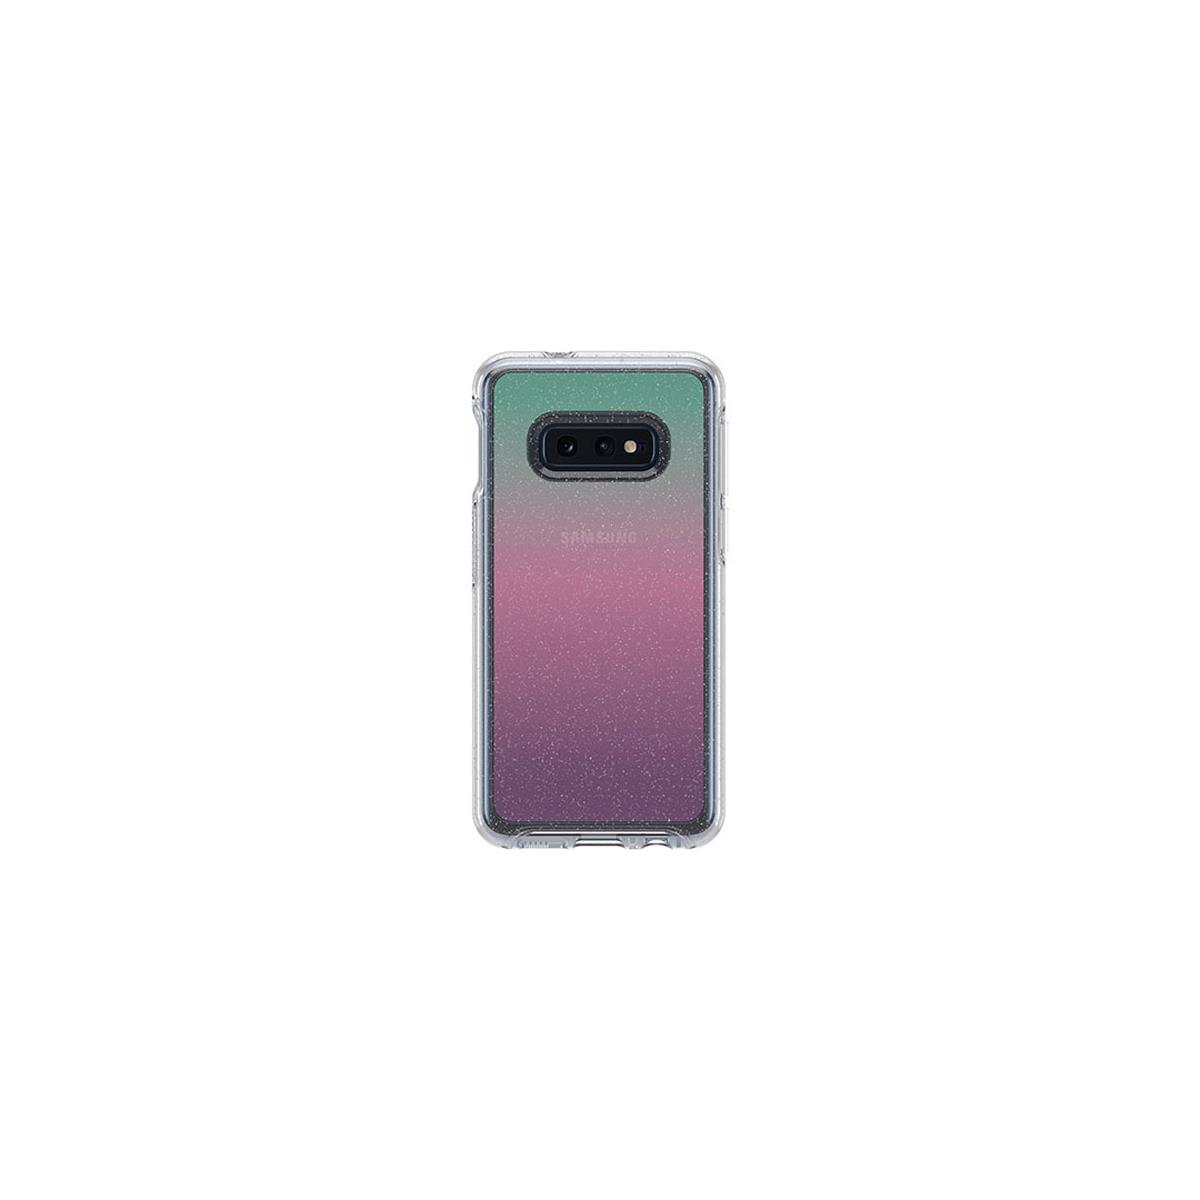 Image of OtterBox Symmetry Case for Samsung Galaxy S10e Smartphone